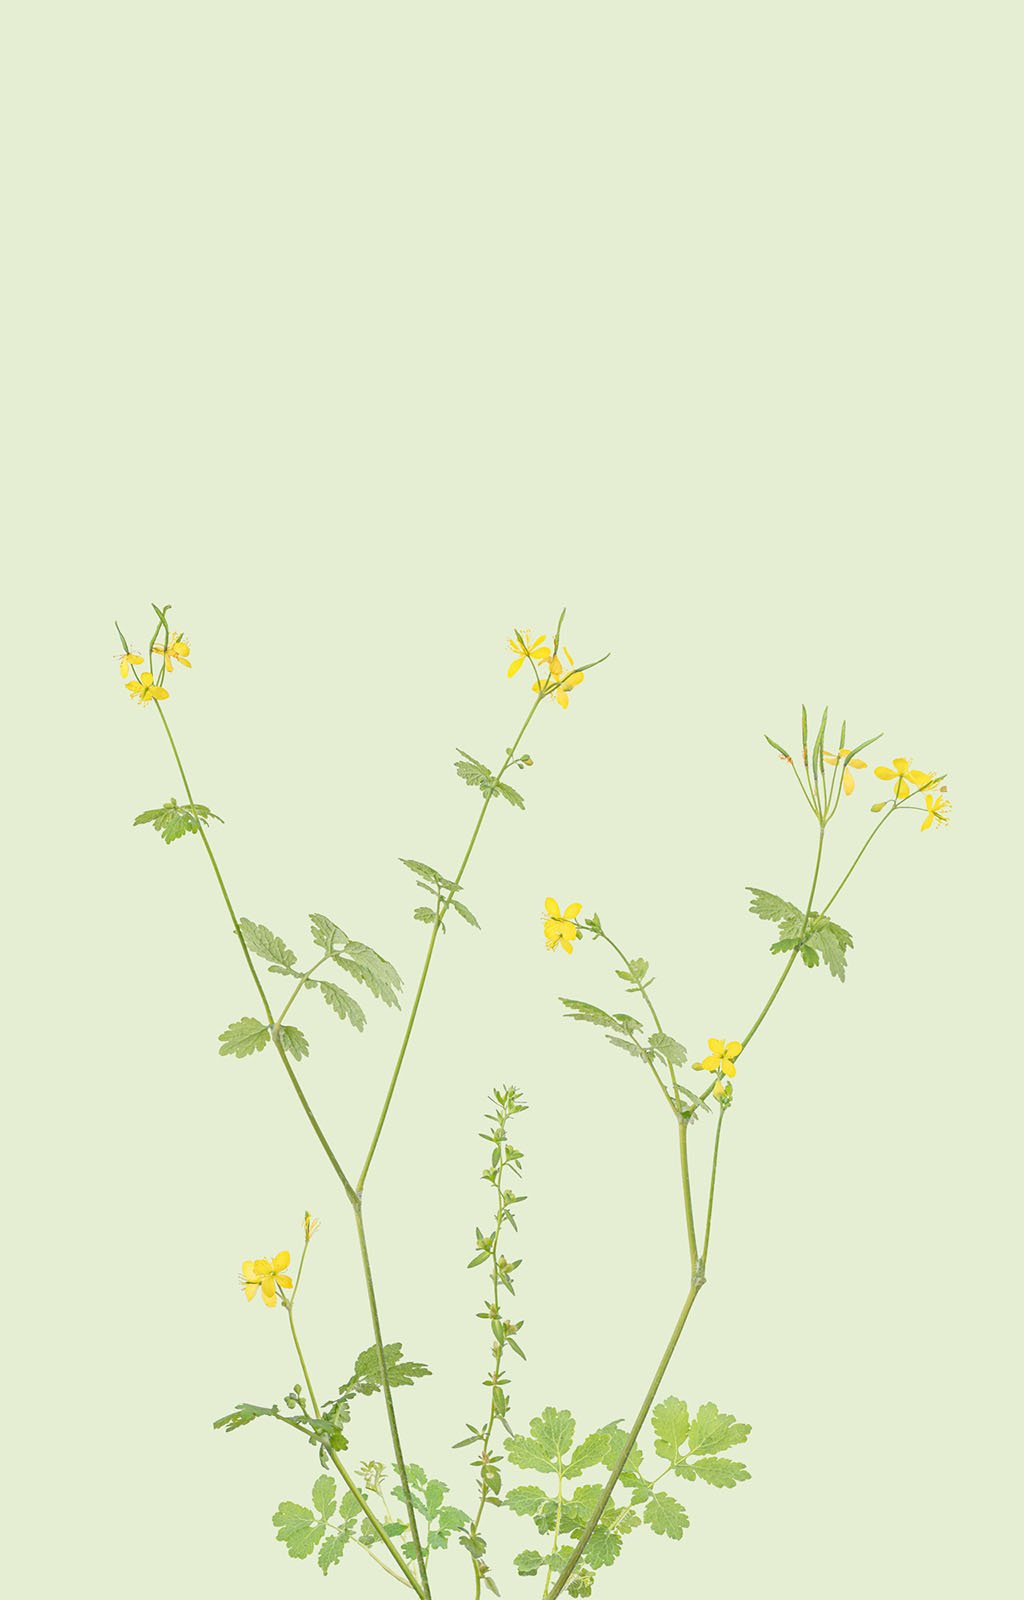 A minimalist illustration featuring delicate yellow flowers with green stems and leaves on a soft pastel green background.